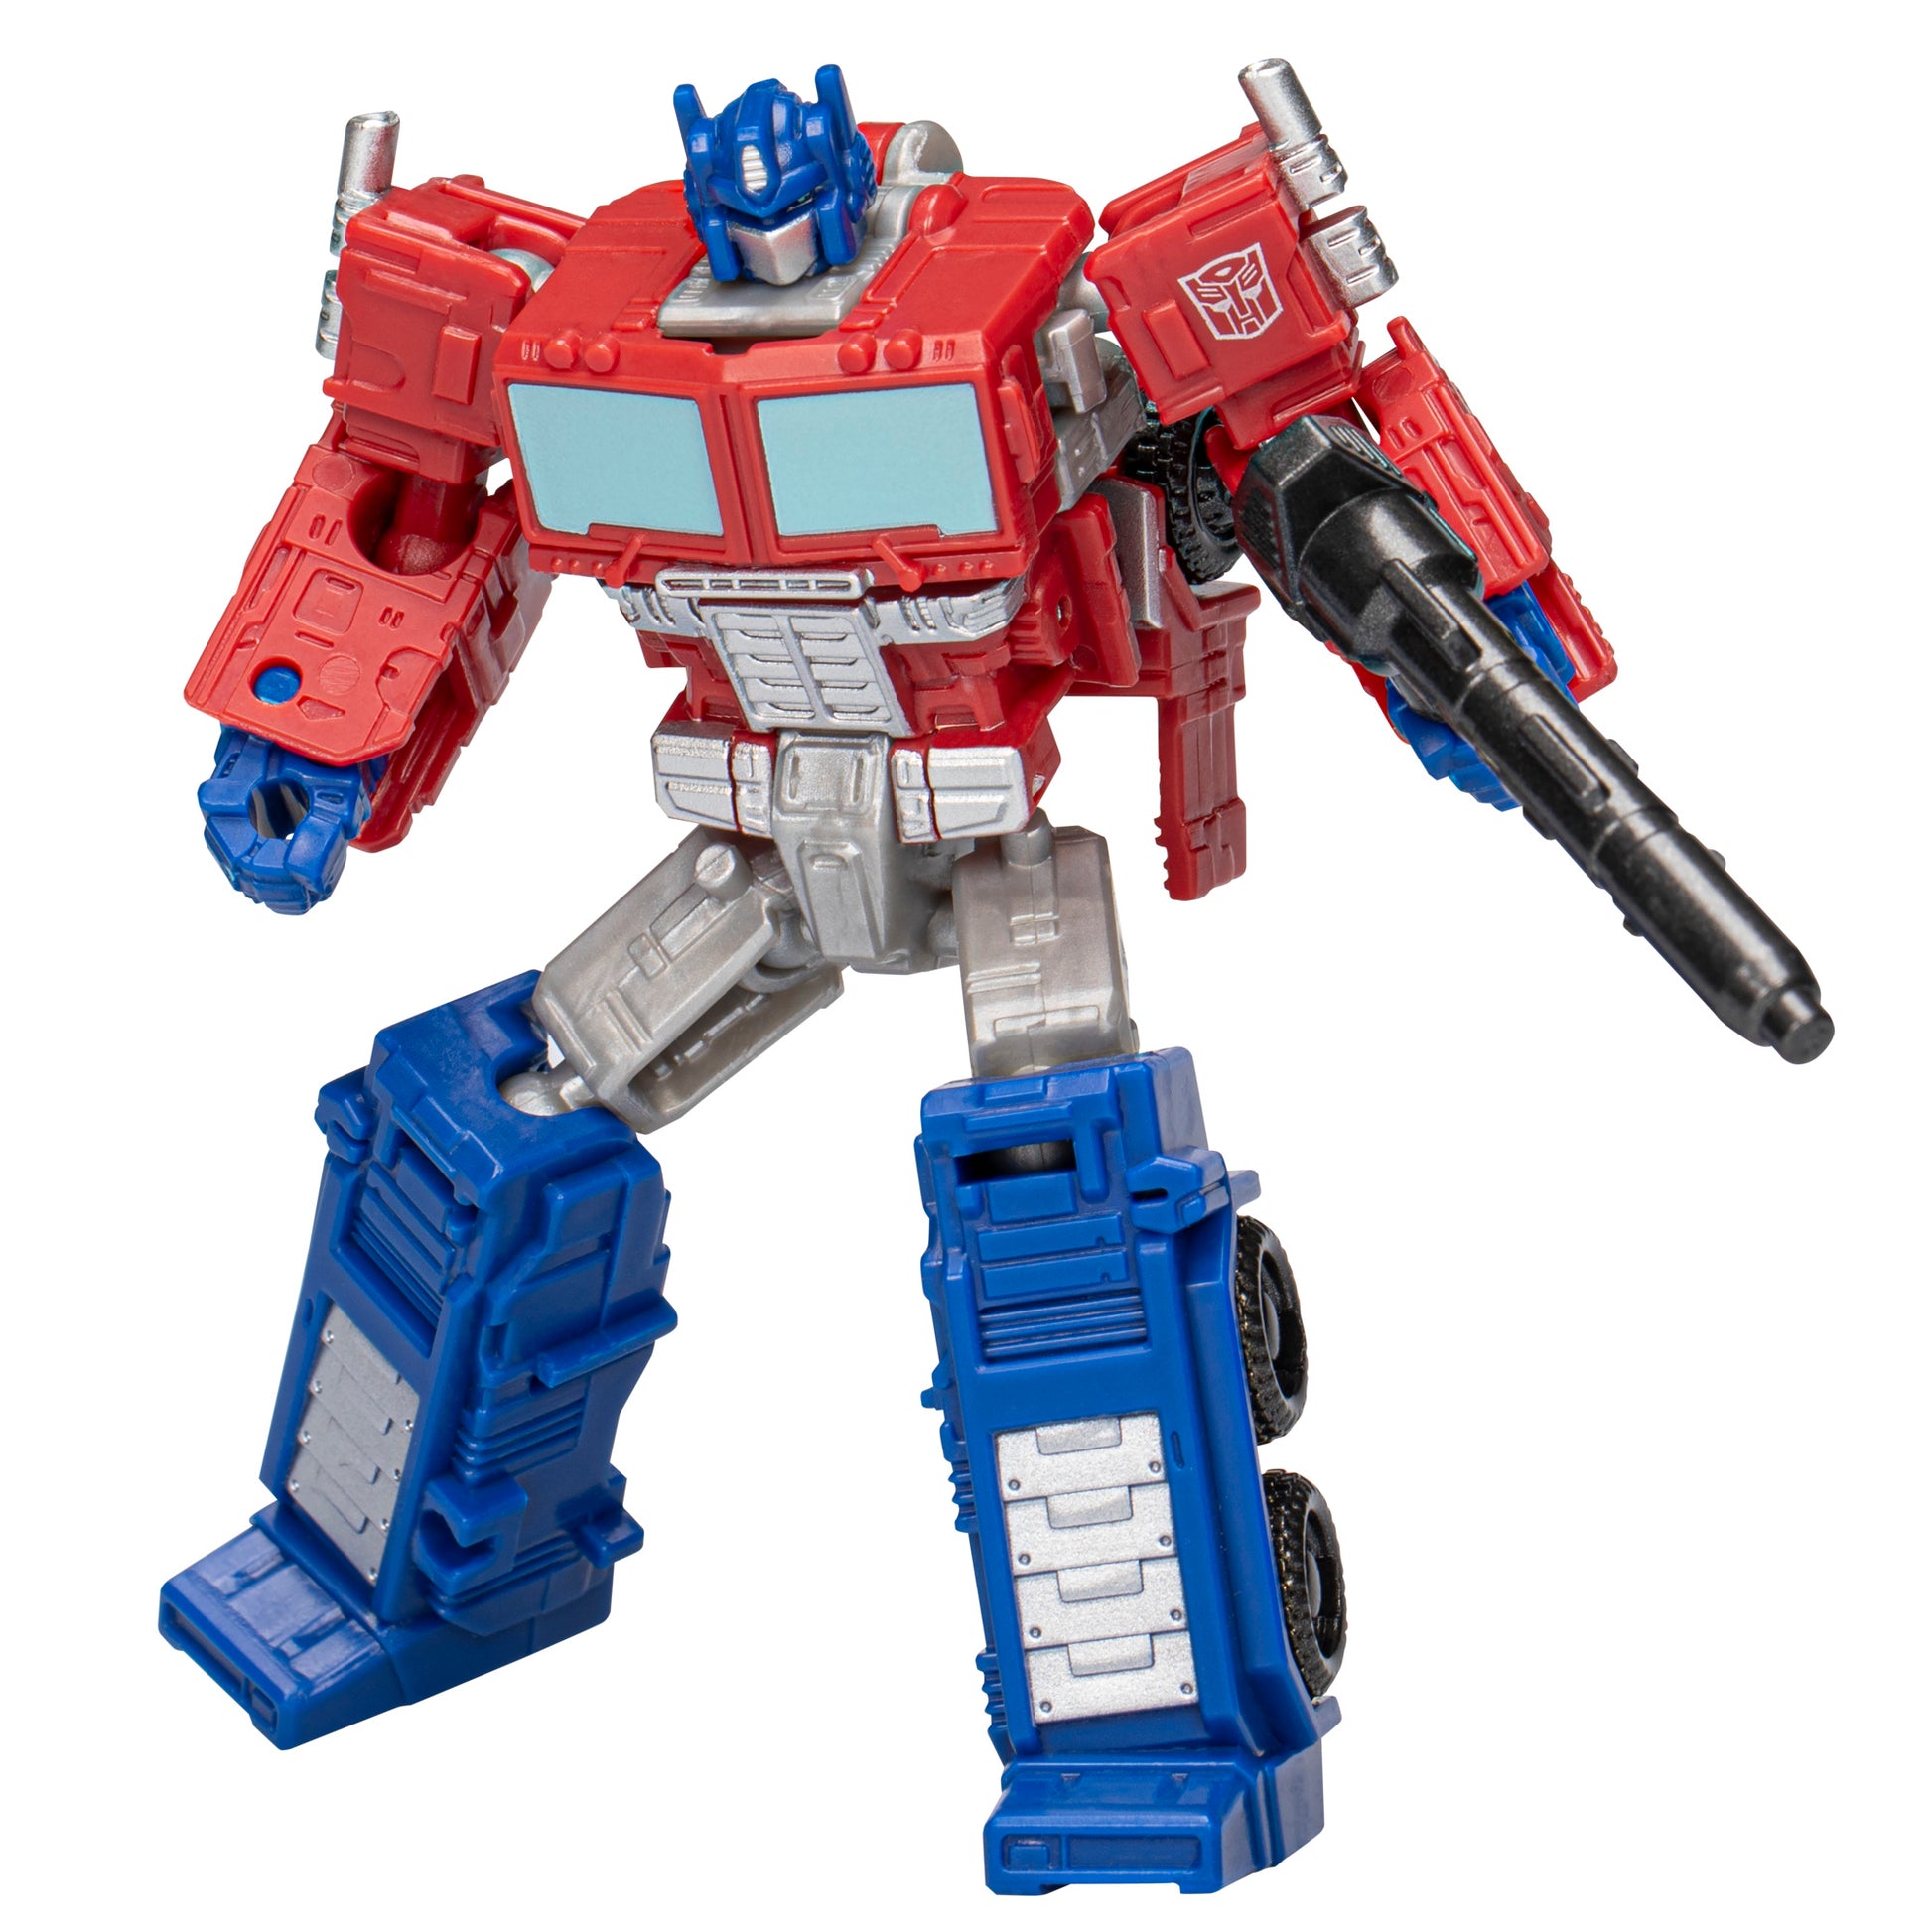 Transformers Legacy Evolution Core Class Optimus Prime Action Figure Toy - Heretoserveyou